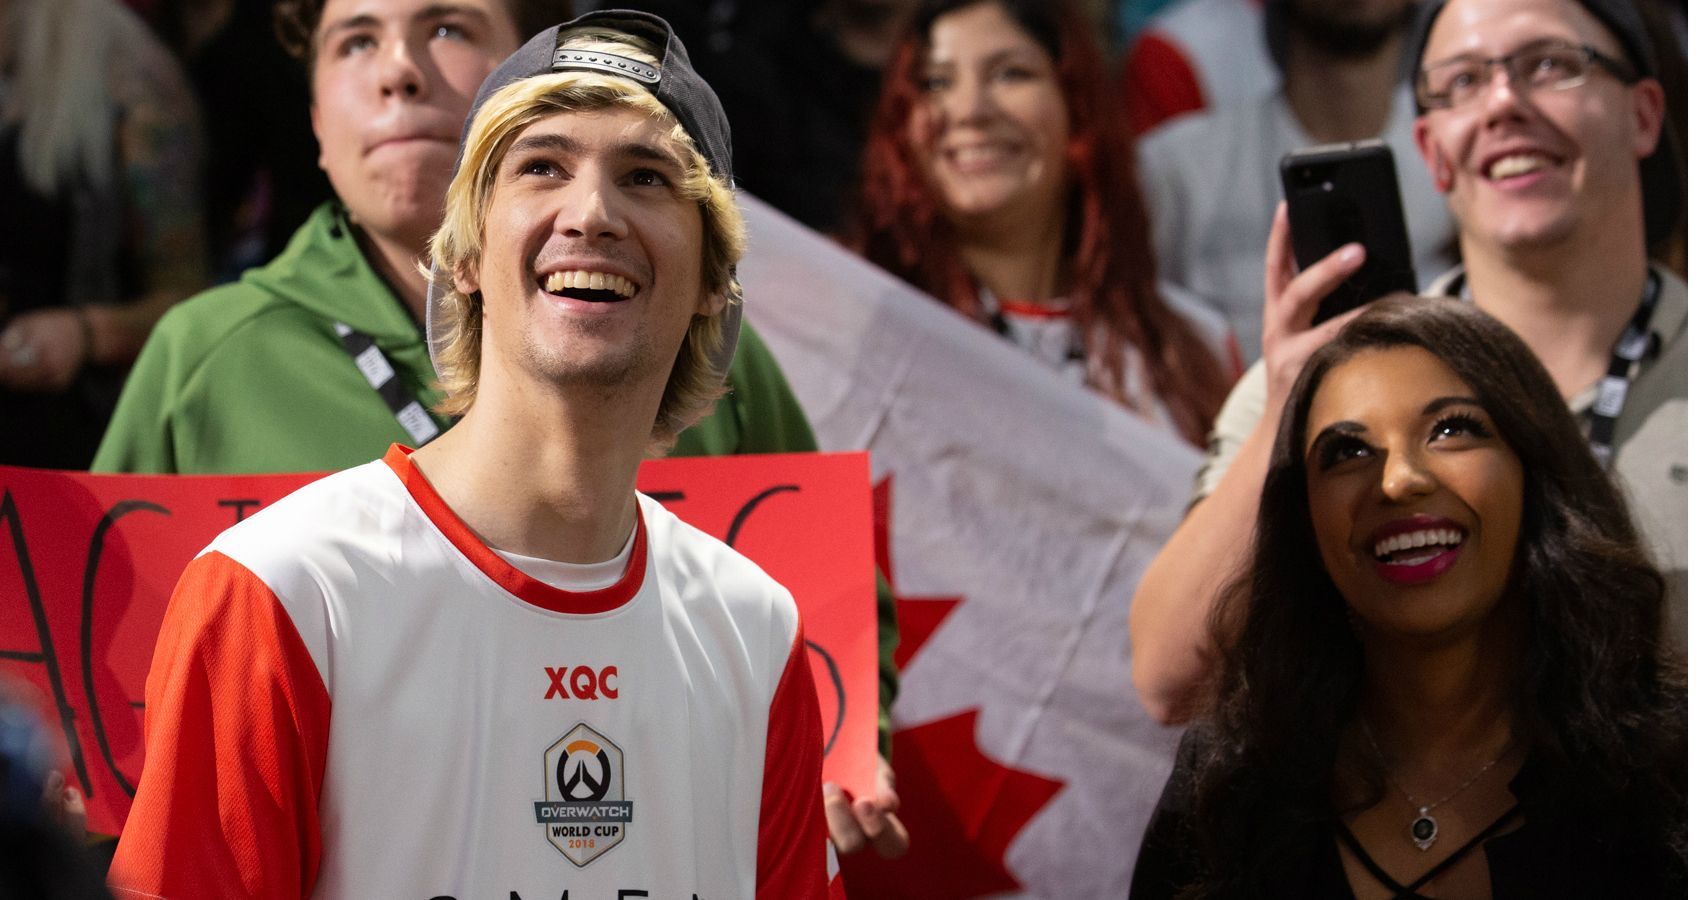 Xqc And Surefour To Lead Team Canada During Overwatch World Cup 19